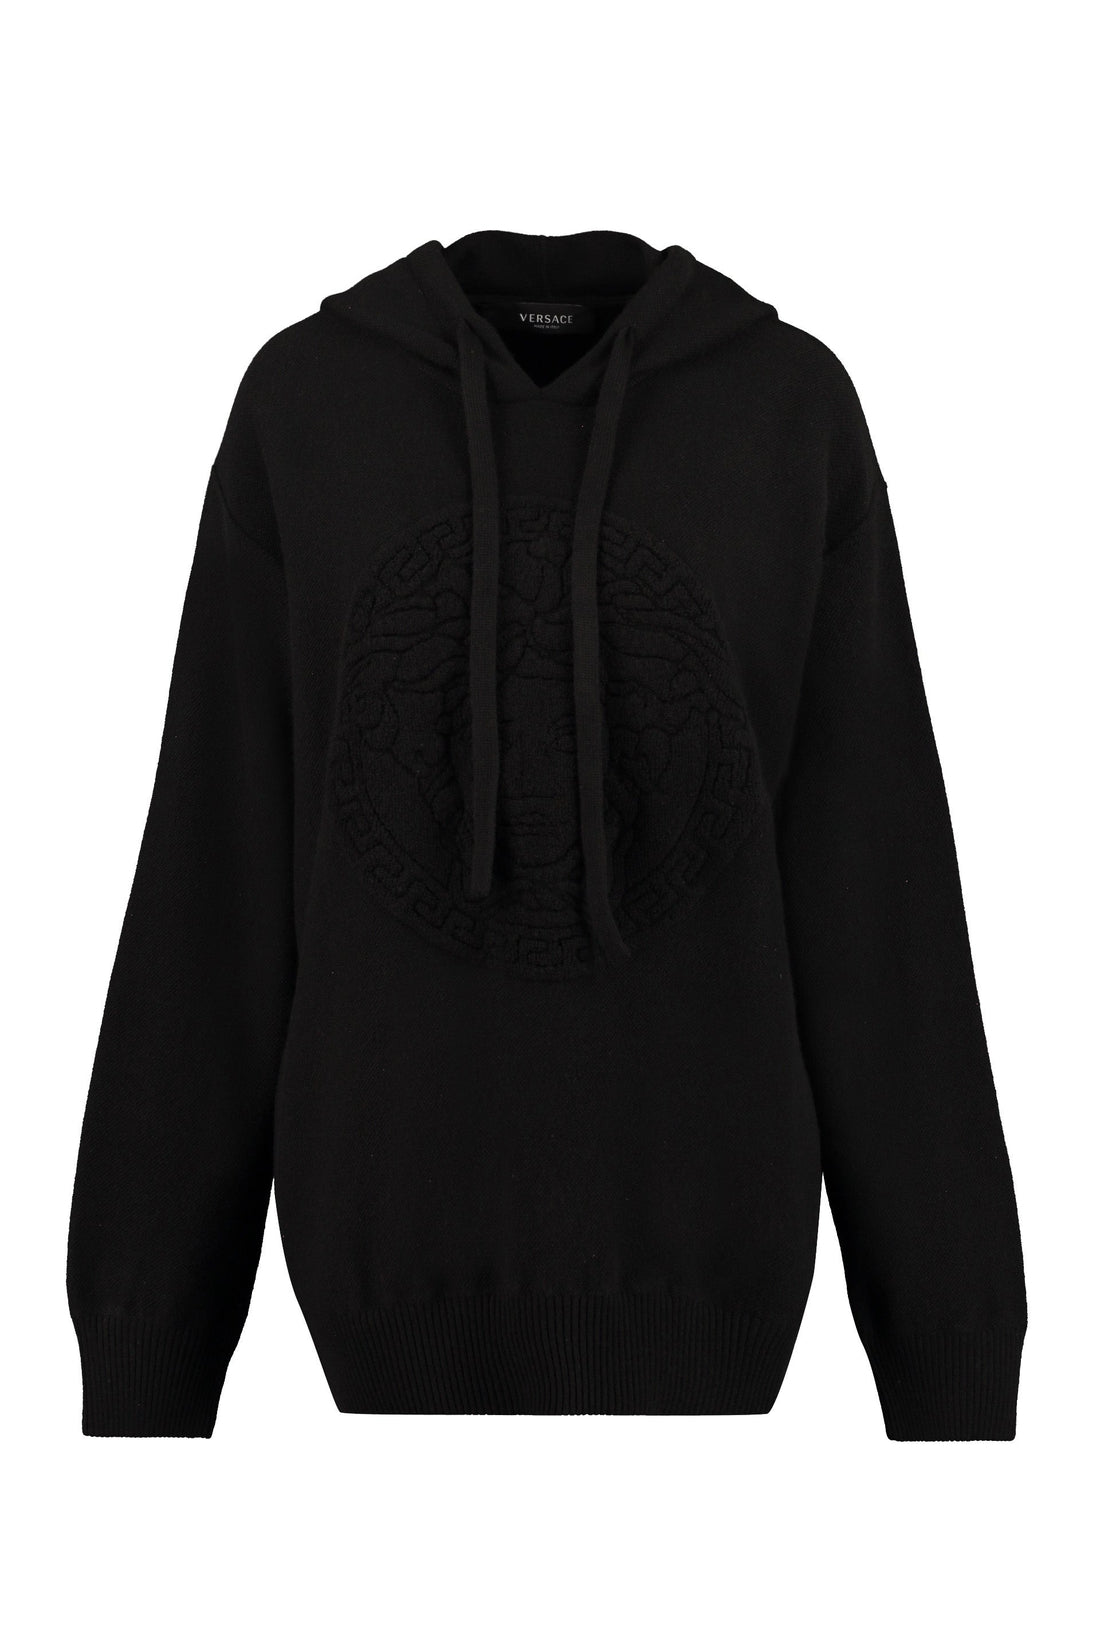 Versace-OUTLET-SALE-Knitted hoodie-ARCHIVIST